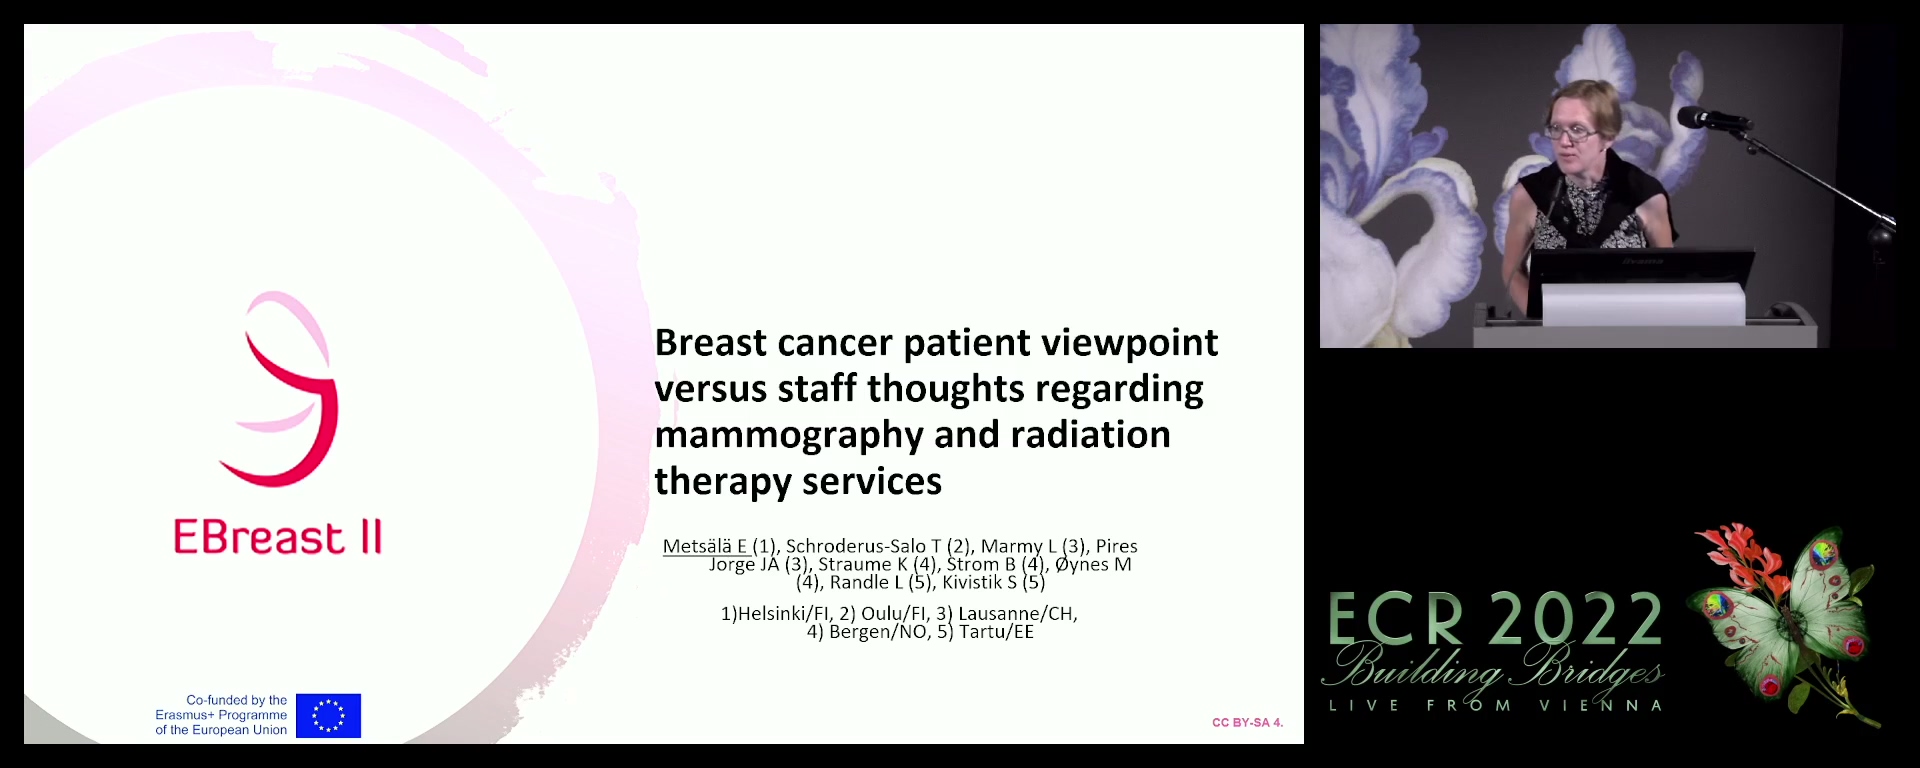 Breast cancer patient viewpoint versus staff thoughts regarding mammography and radiation therapy services - Eija Metsälä, Helsinki / FI